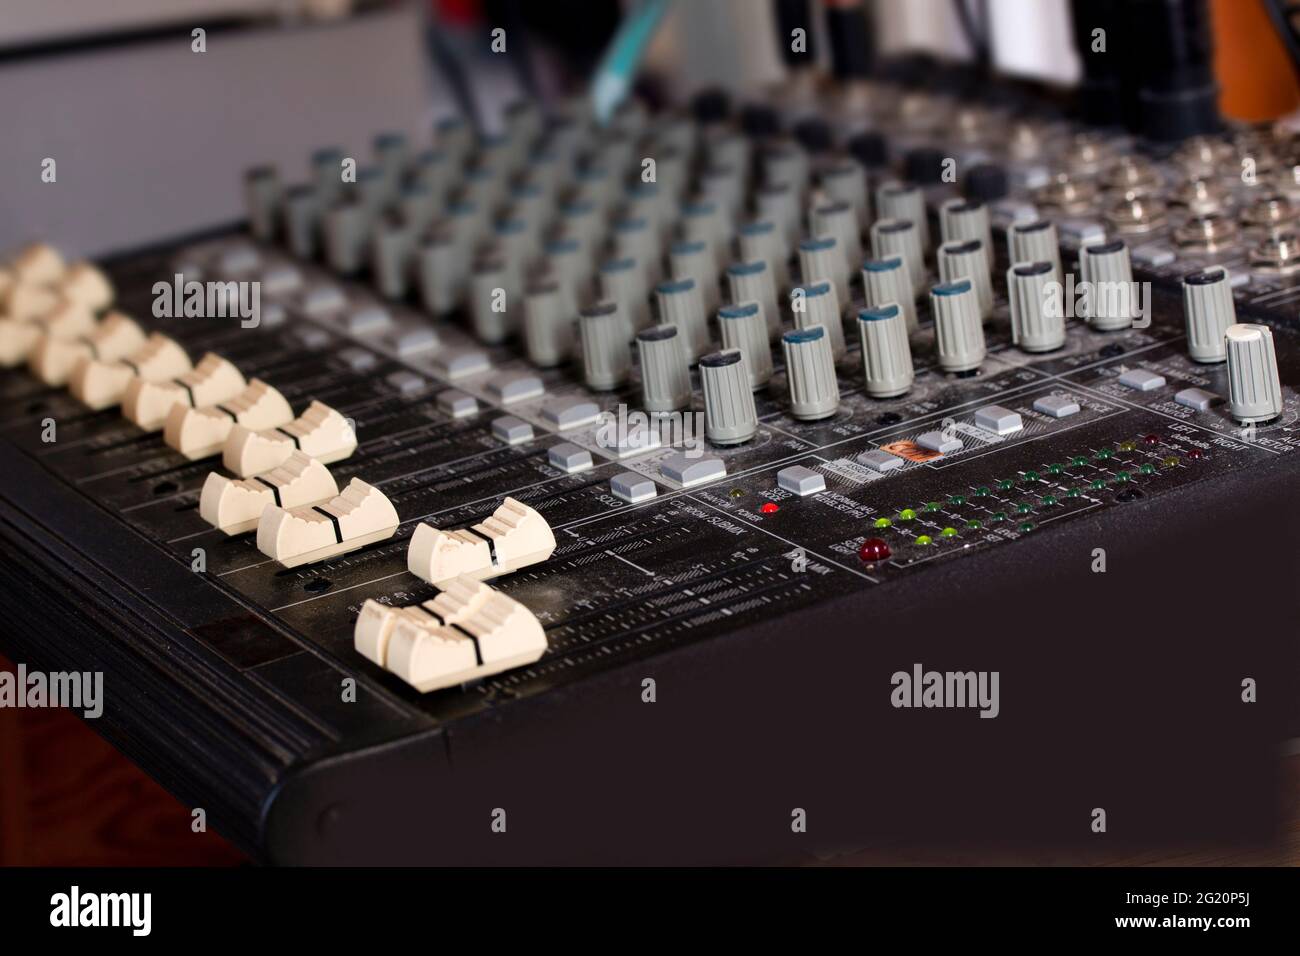 fashioned music sound mixer. Professional audio mixing console DJ with buttons, and sliders Stock Photo Alamy